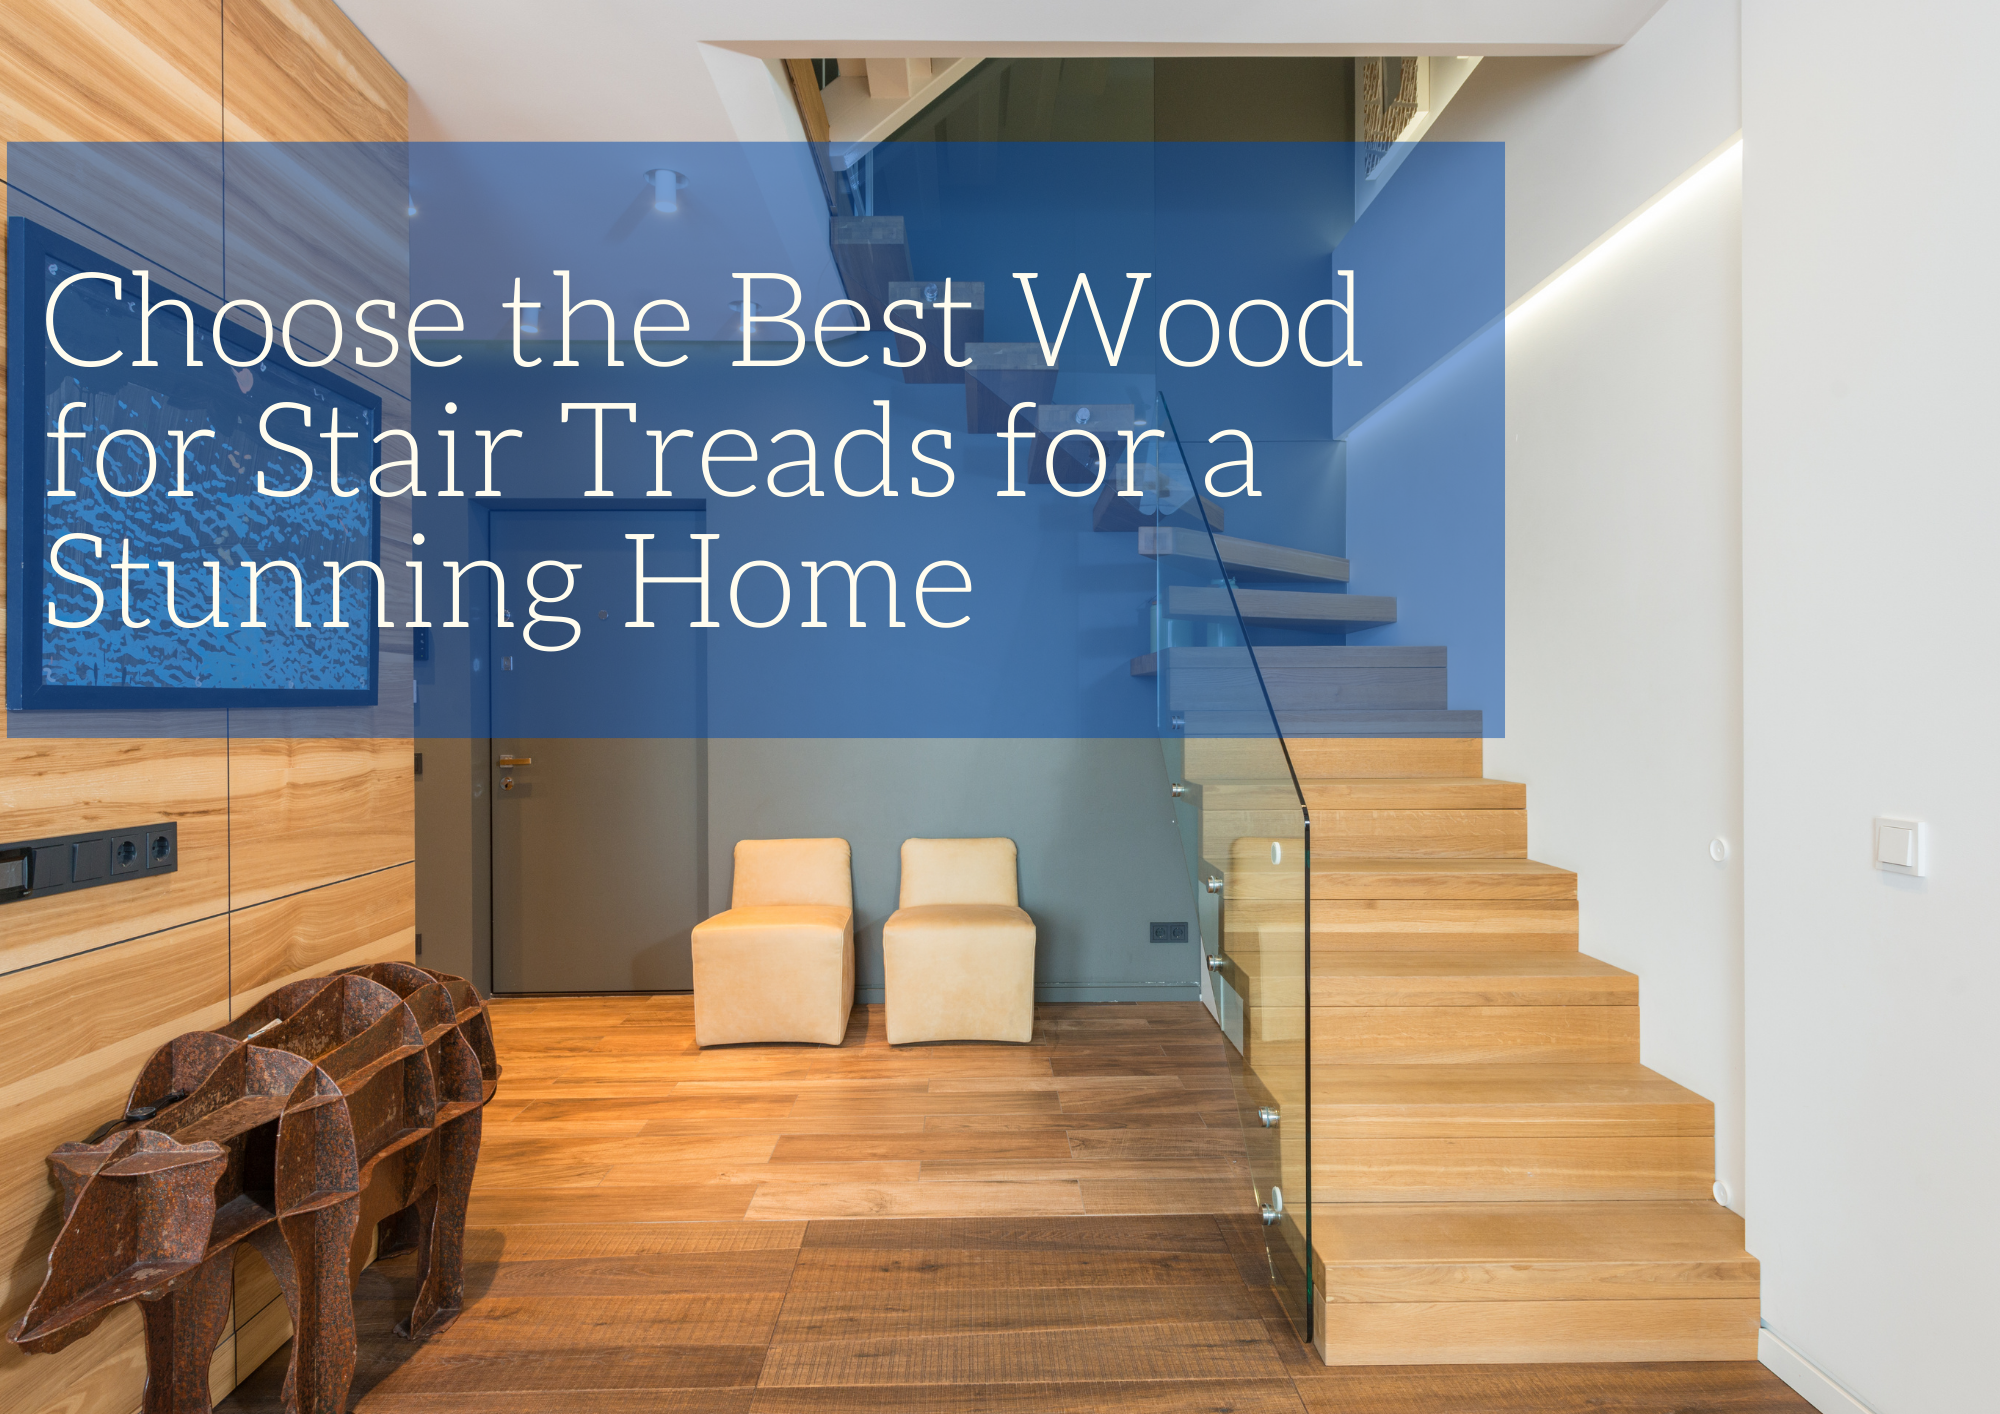 Choose the best wood for stair treads for a stunning home